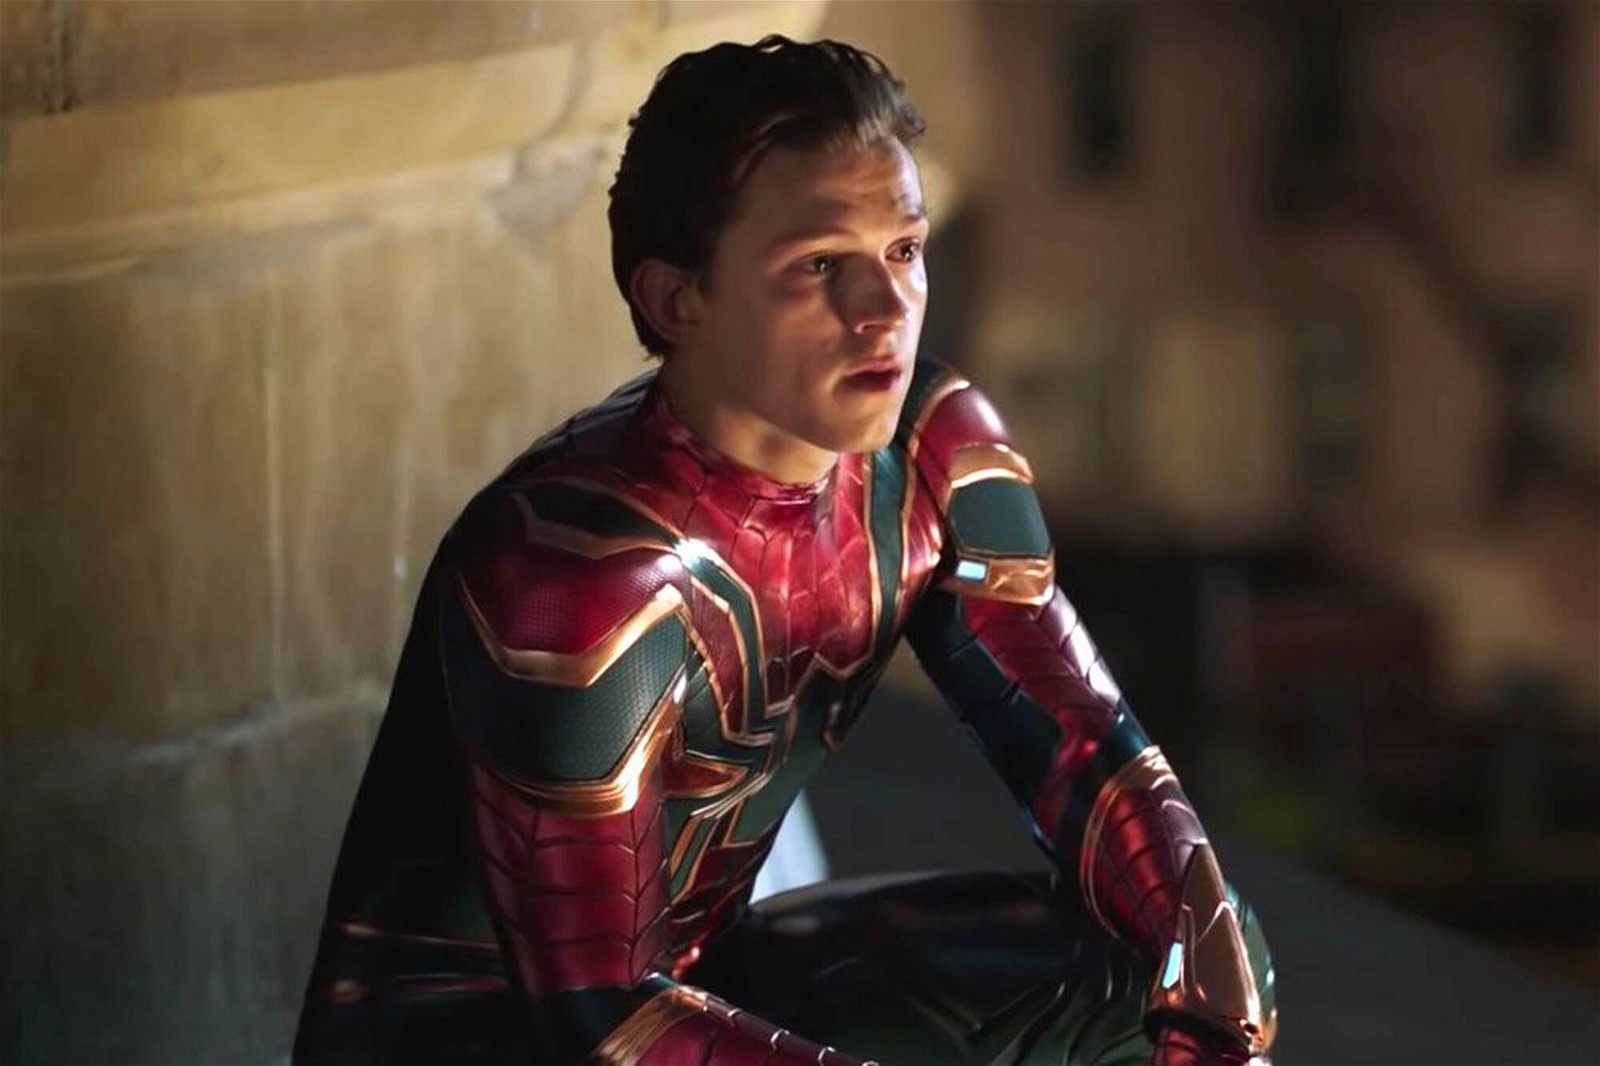 Tom Holland as Spider-Man in a still from Spider-Man: Far From Home